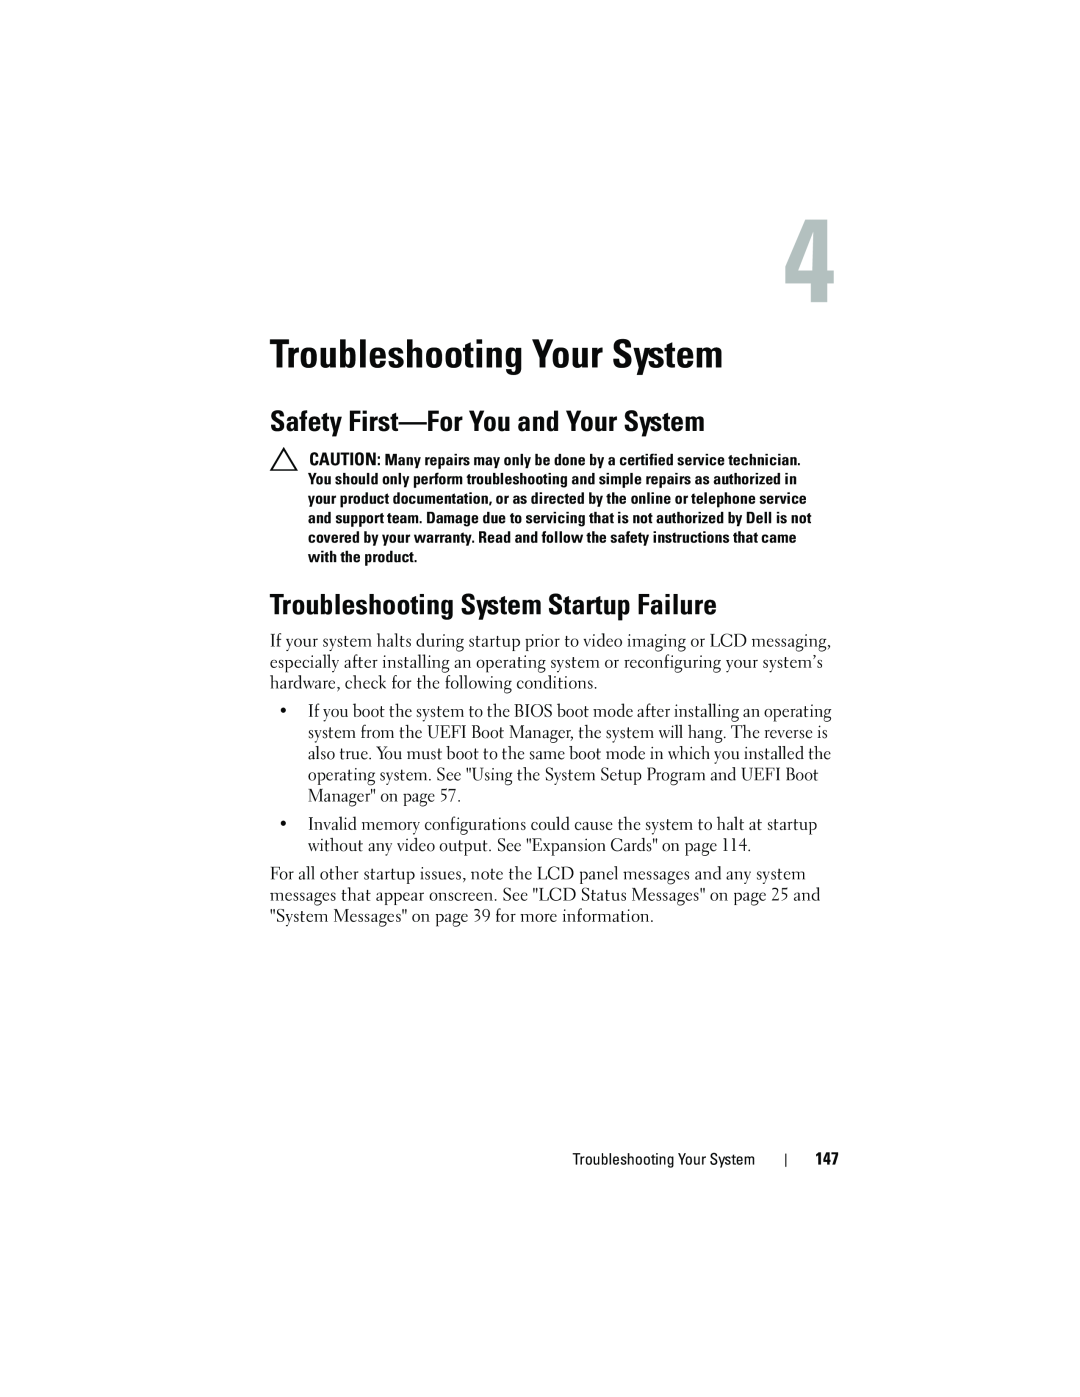 Dell T310 Troubleshooting Your System, Safety First-For You and Your System, Troubleshooting System Startup Failure 